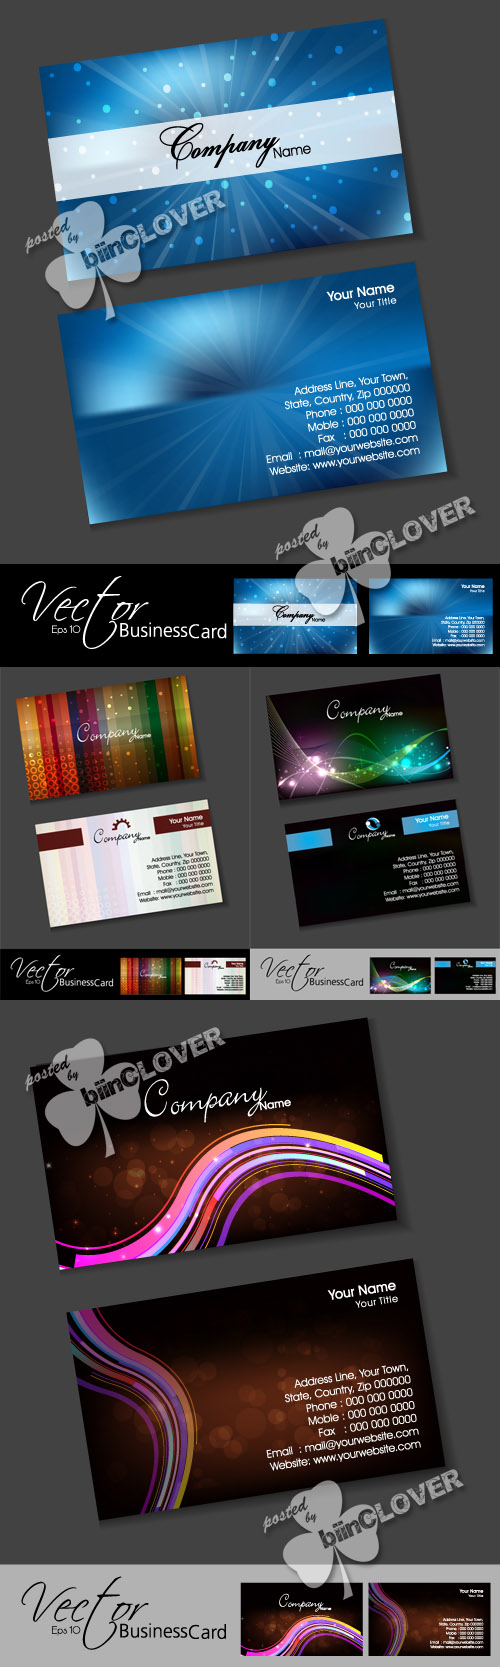 Template of business cards 0163